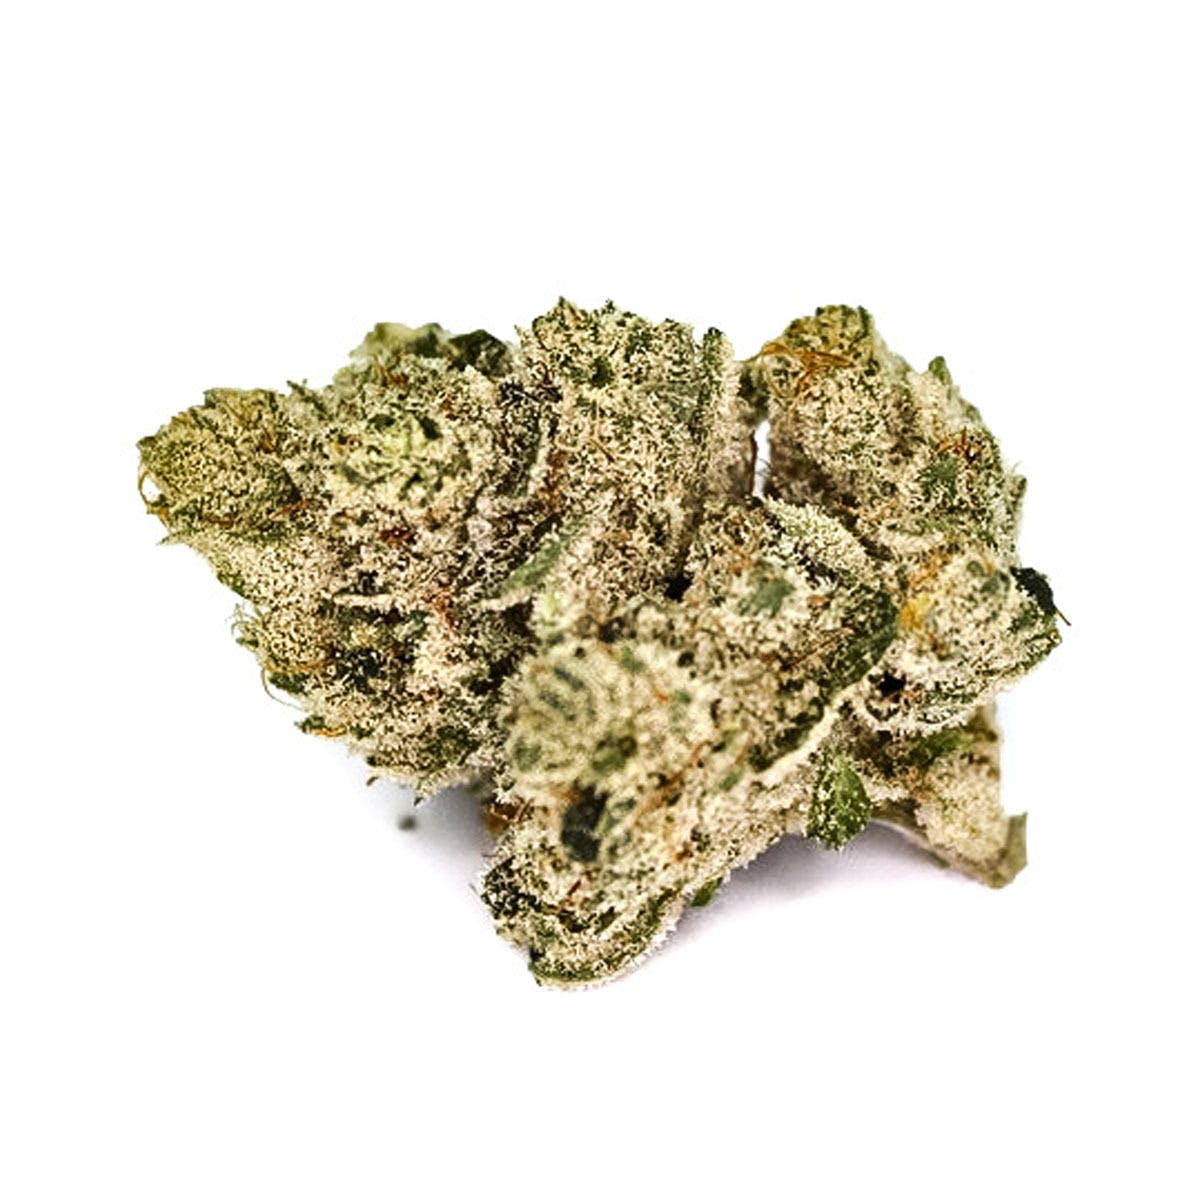 indica-verde-natural-cannabis-hell-monkey